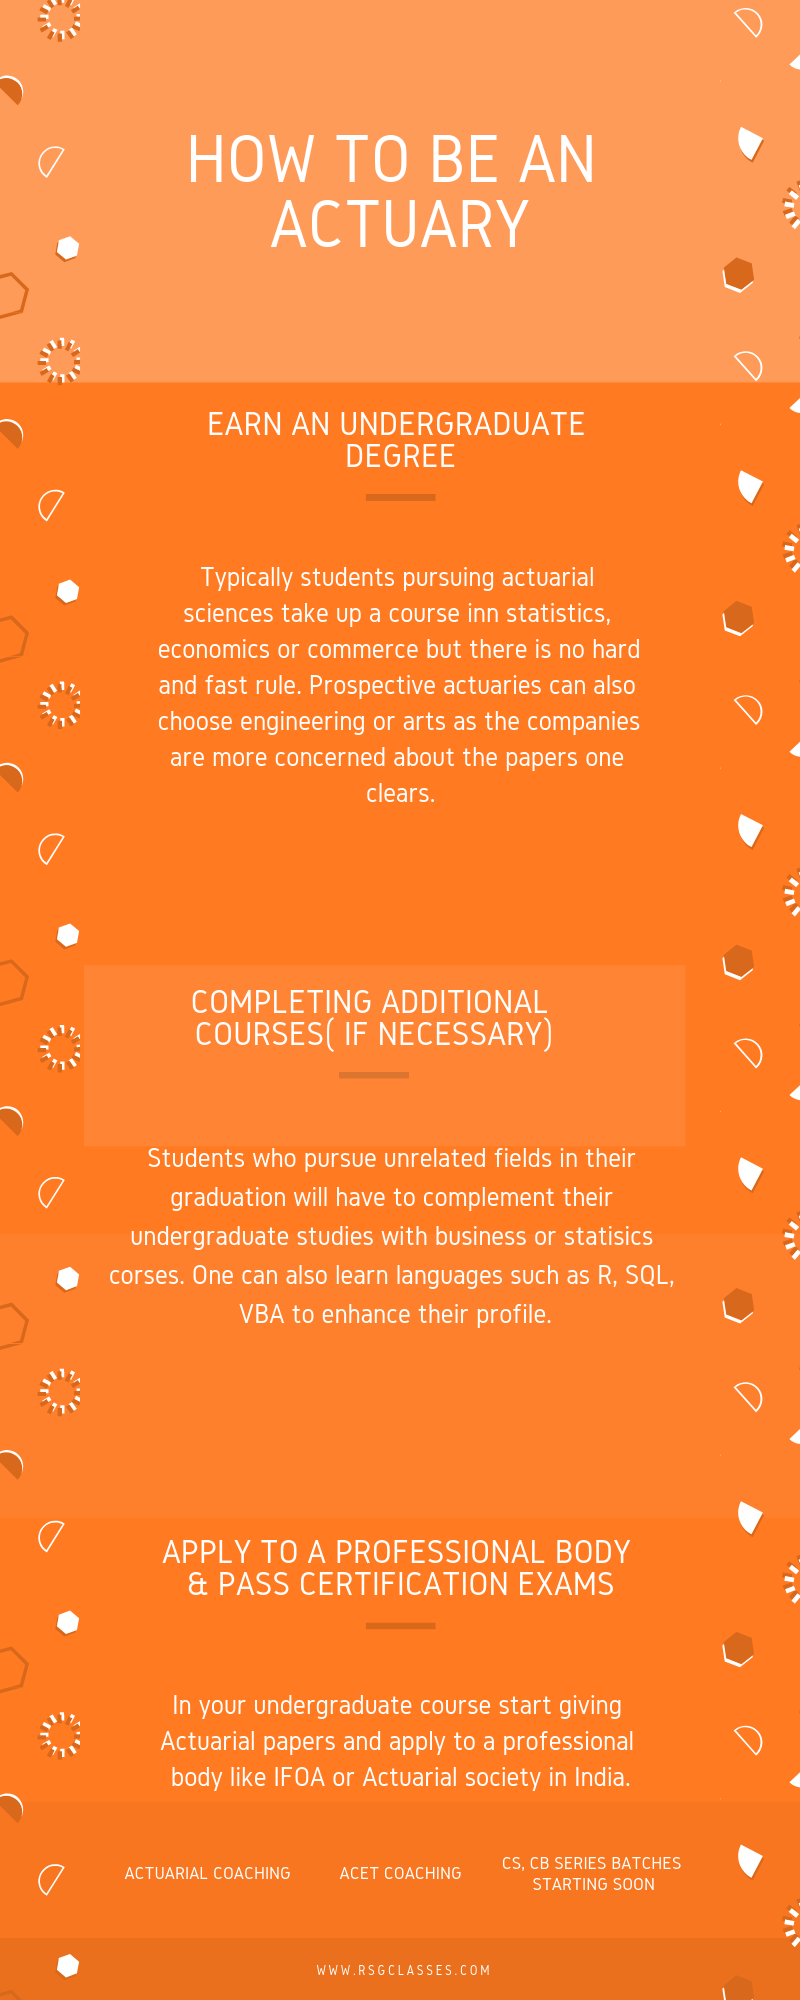 How-to-become-an-Actuary-infographic-plaza